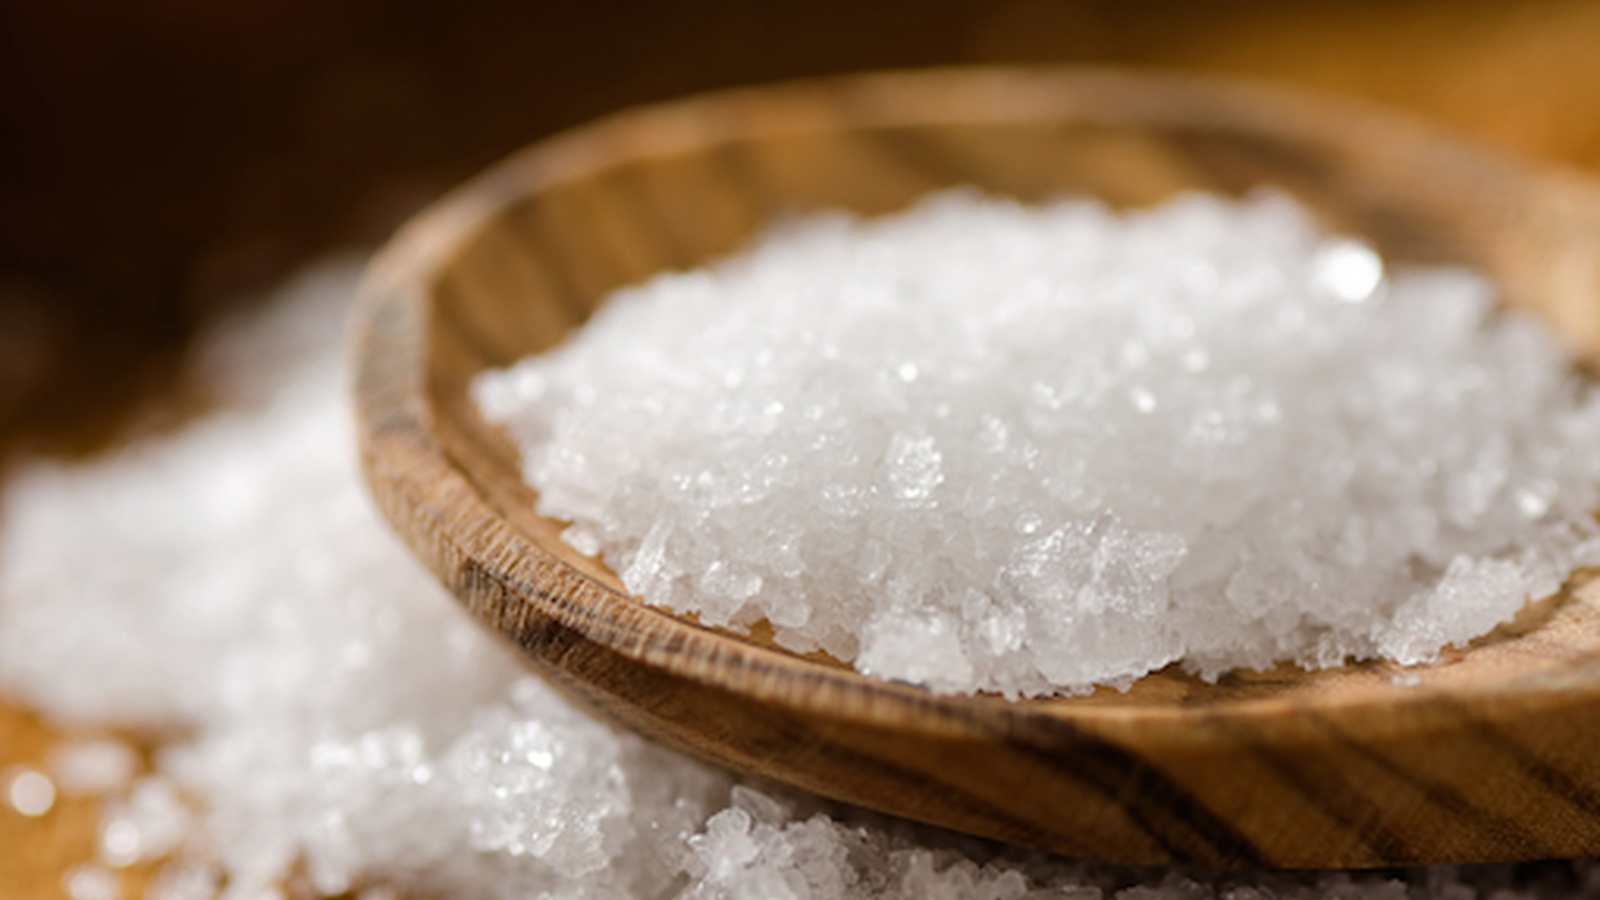 37 Smart Uses Of Salt For Non-Toxic Cleaning Purposes